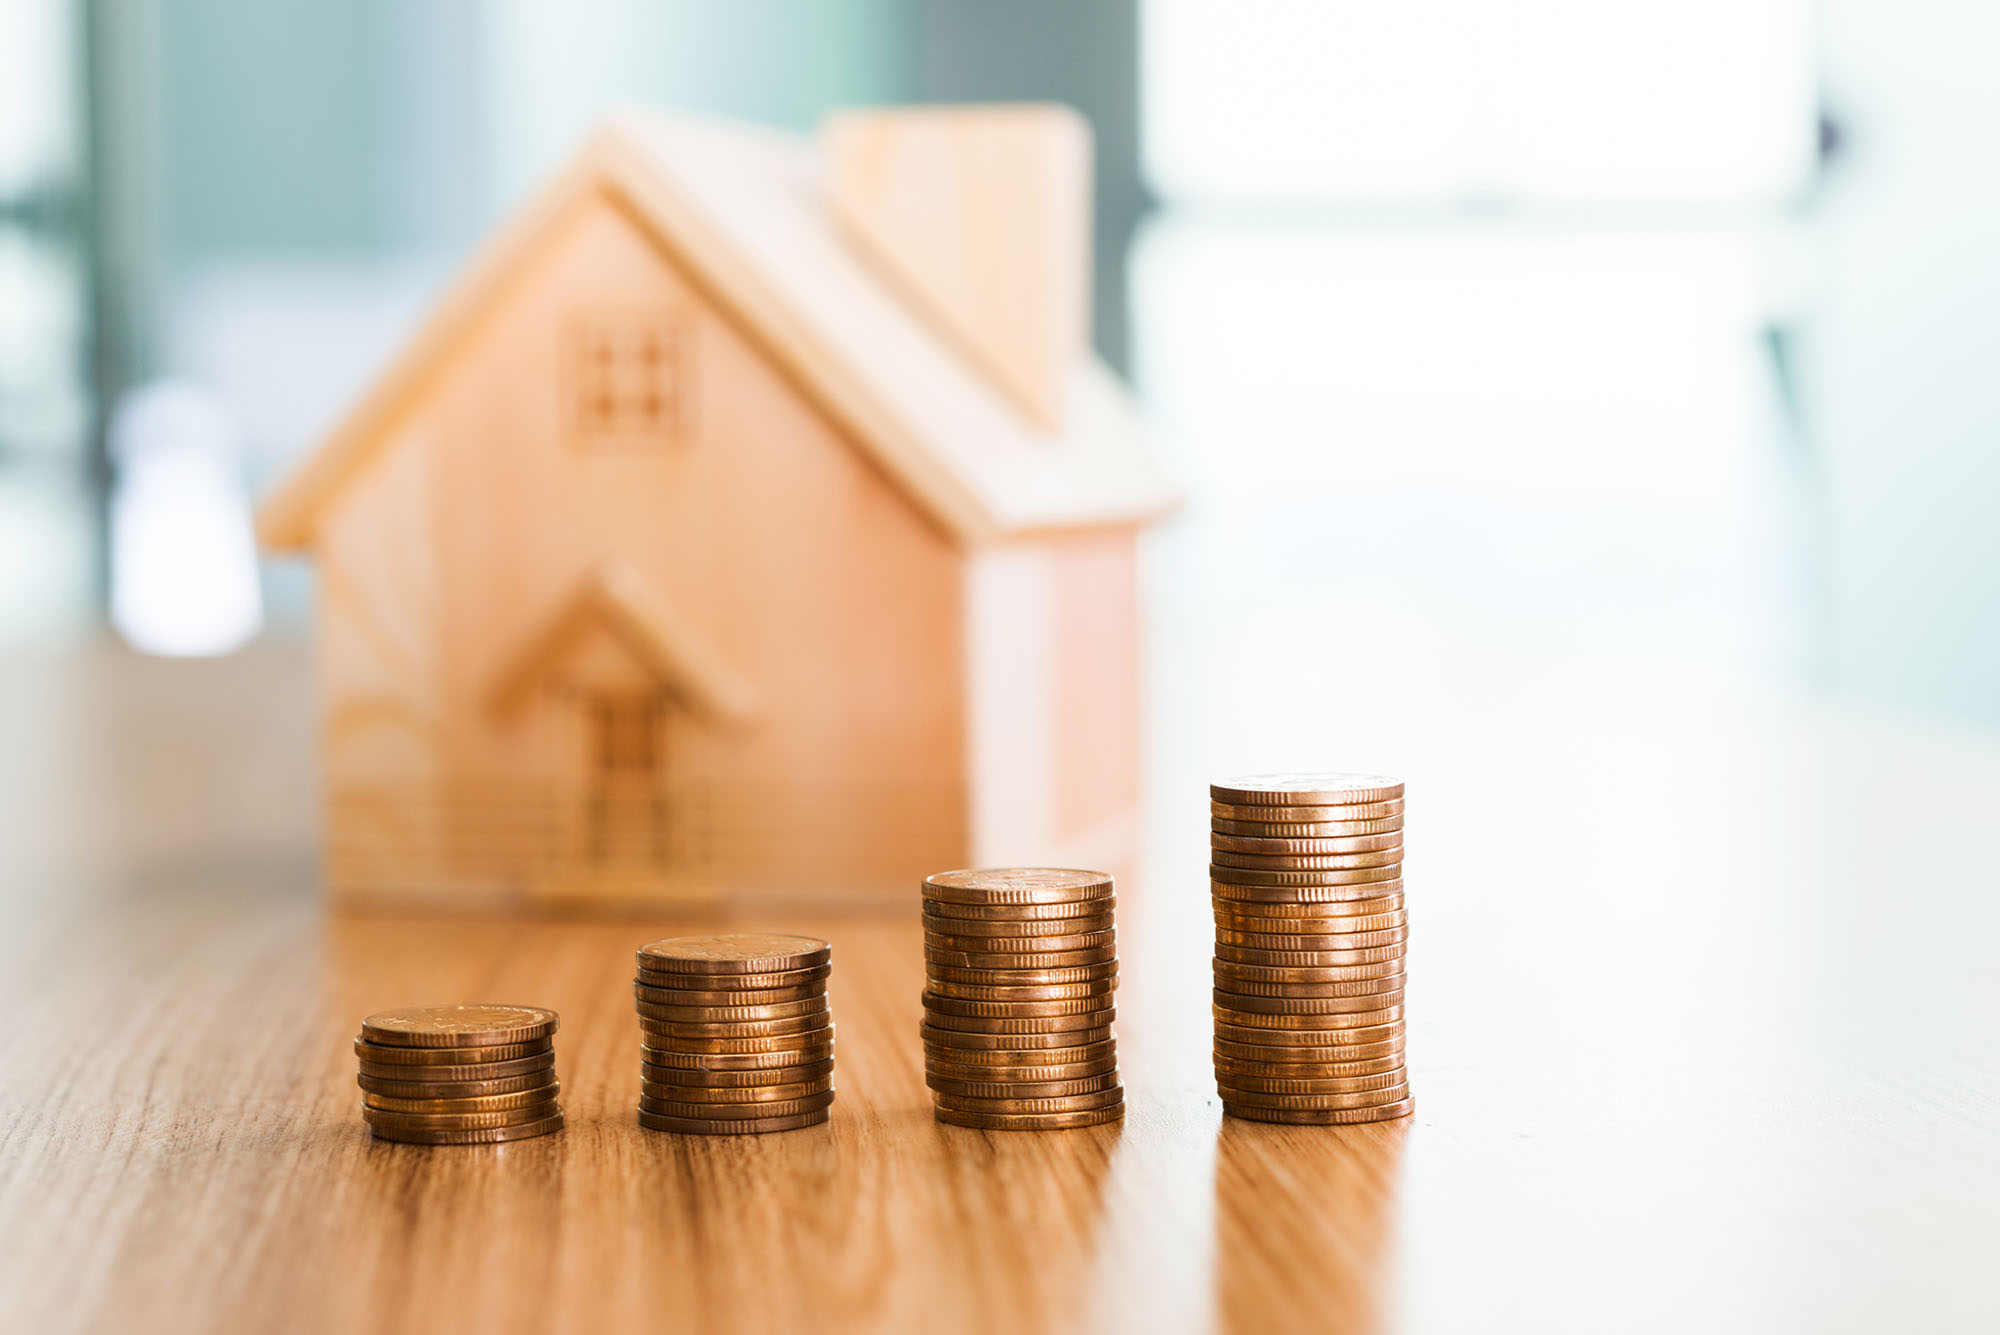 Property – Can You Rely on It to Fund Your Retirement?